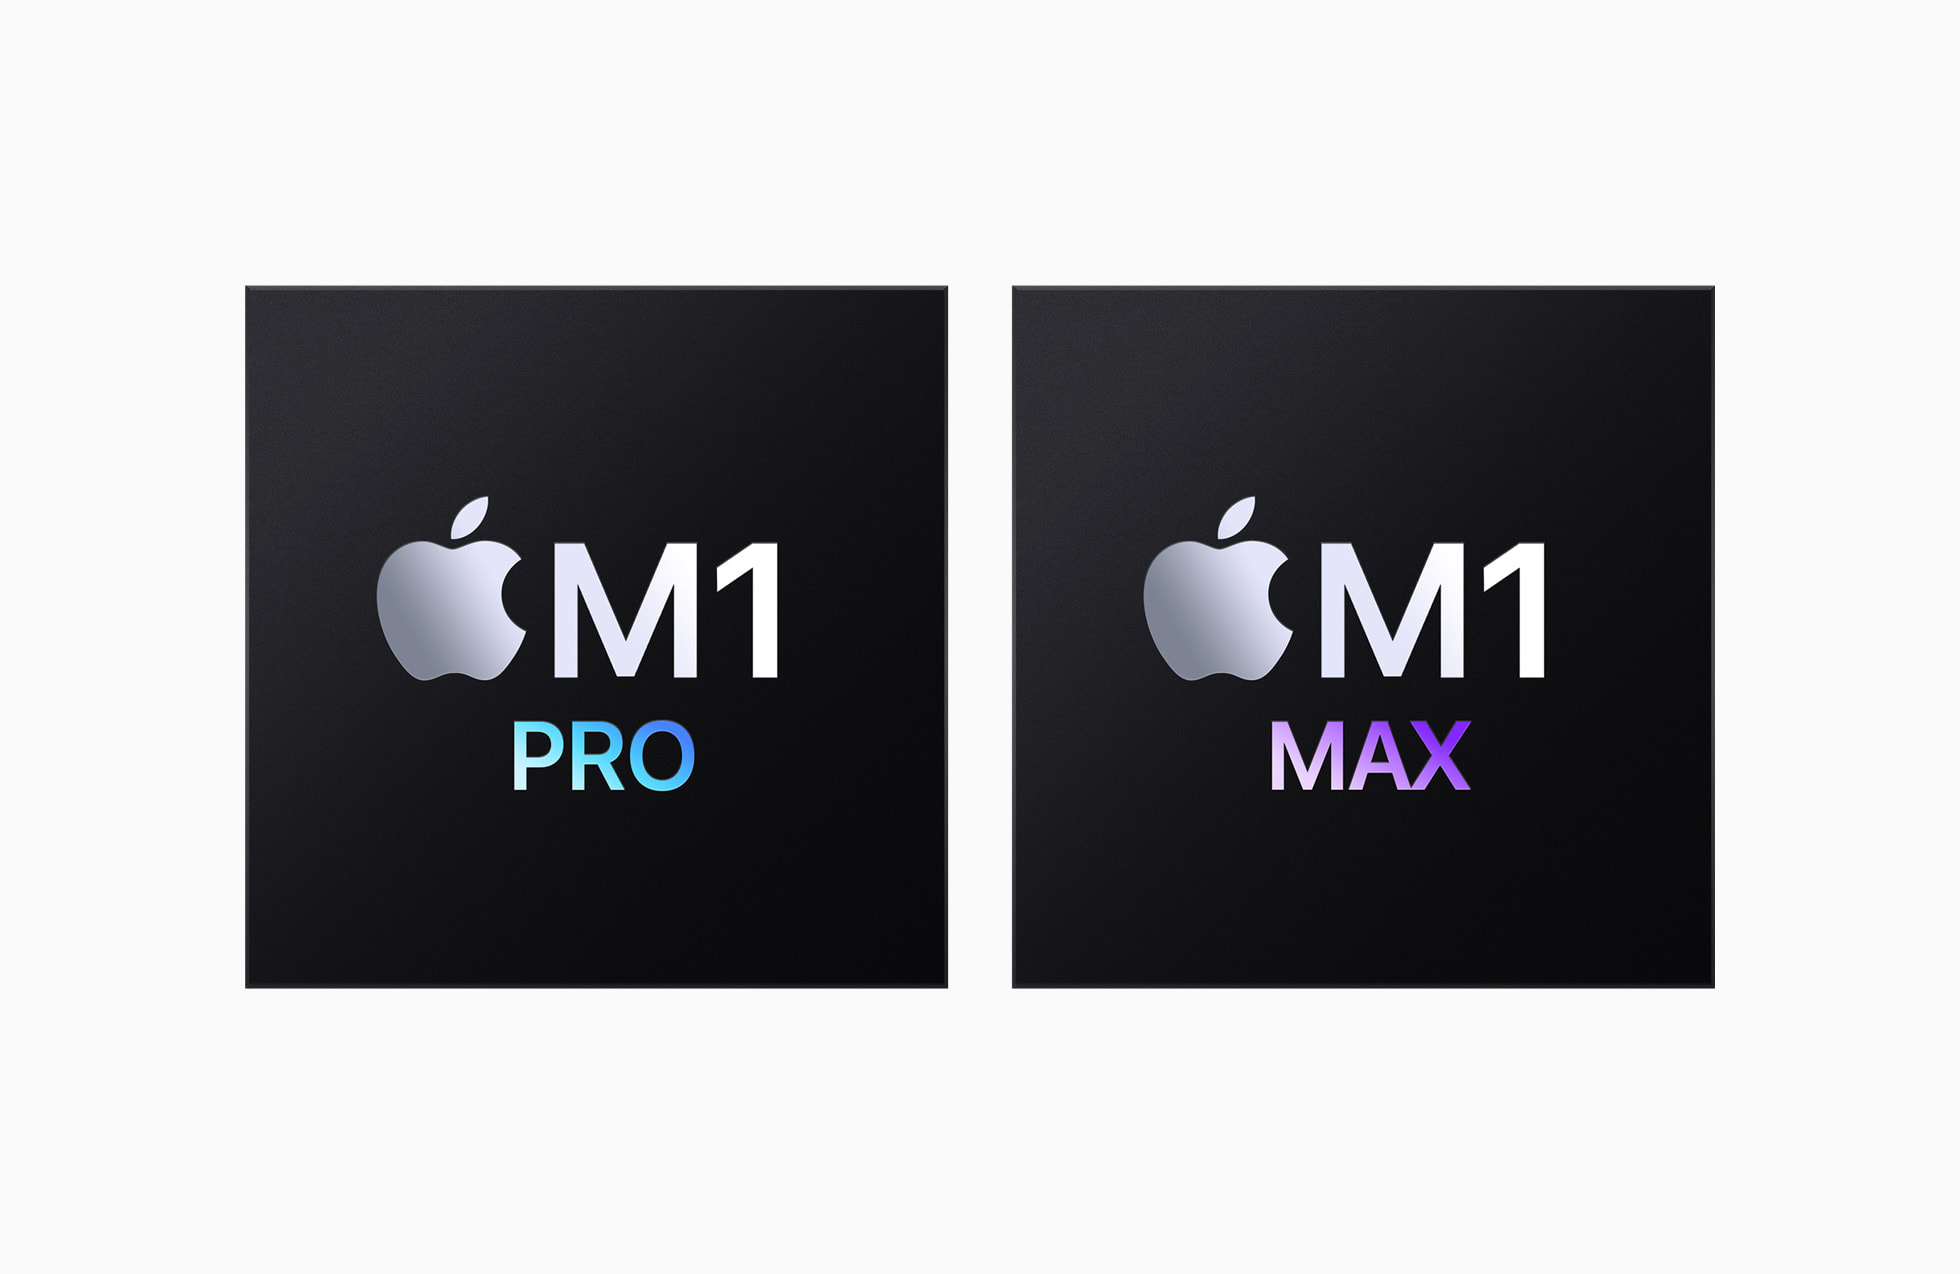 M1 Pro and M1 Max